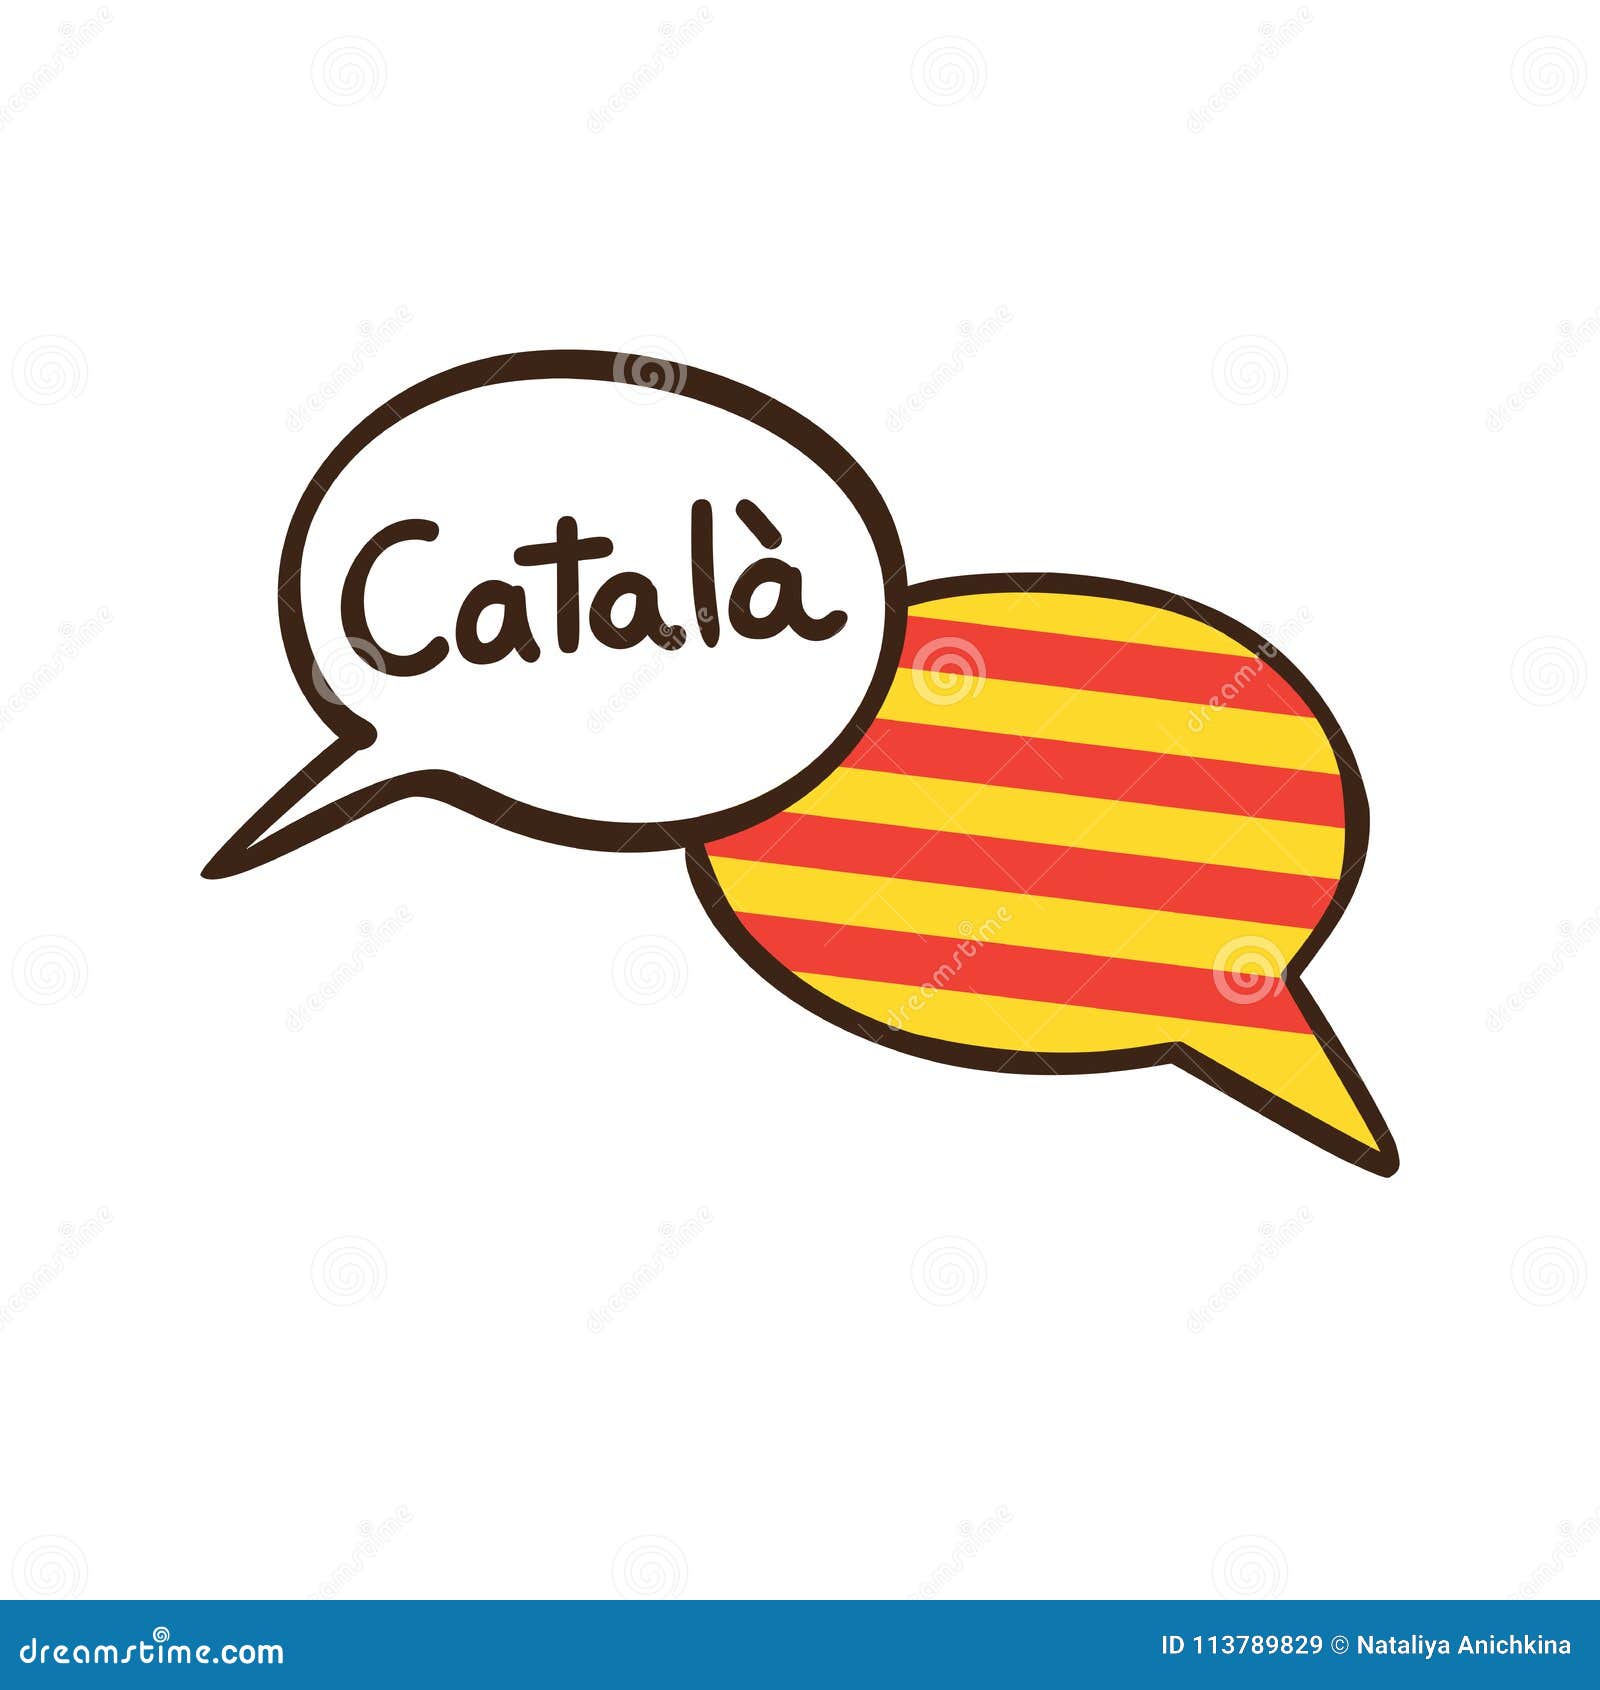 Vector Illustration of the Catalan Language with Two Speech